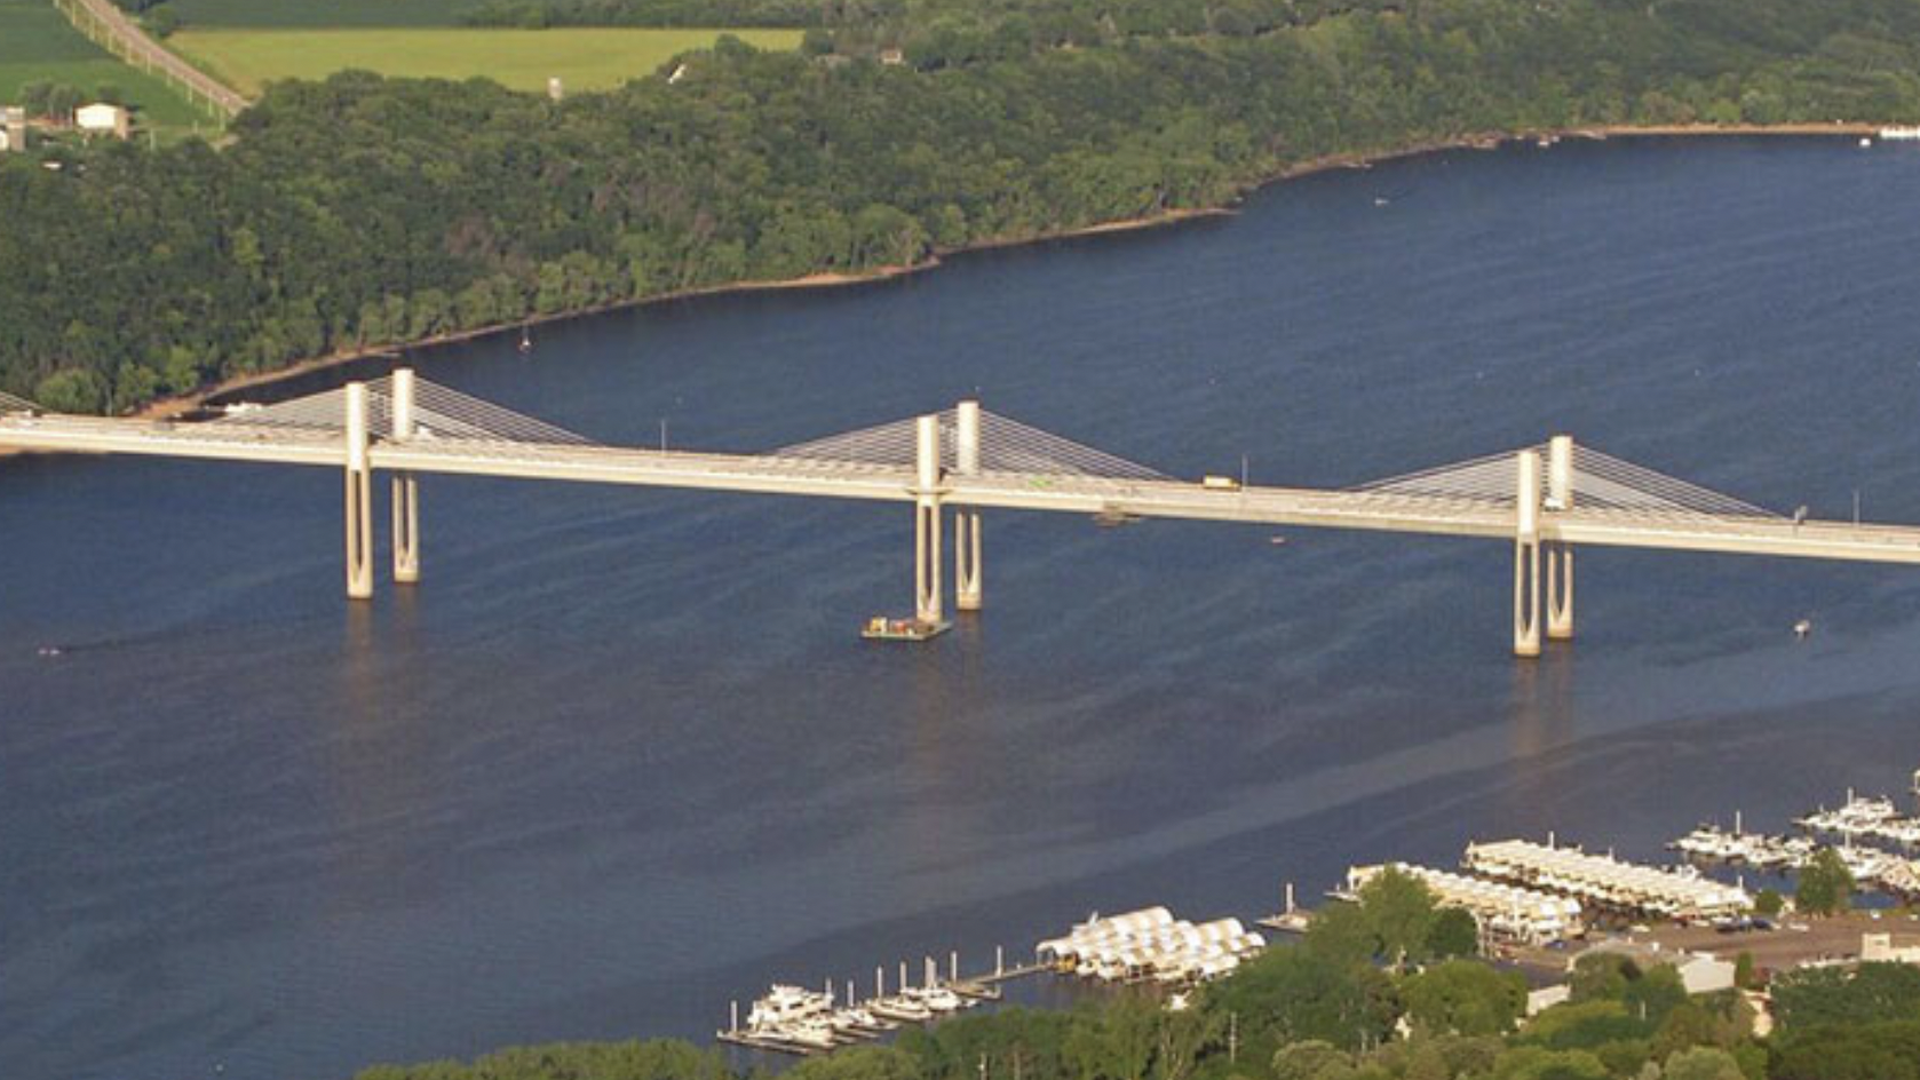 The St. Croix Crossing bridge spans the river on a sunny day 